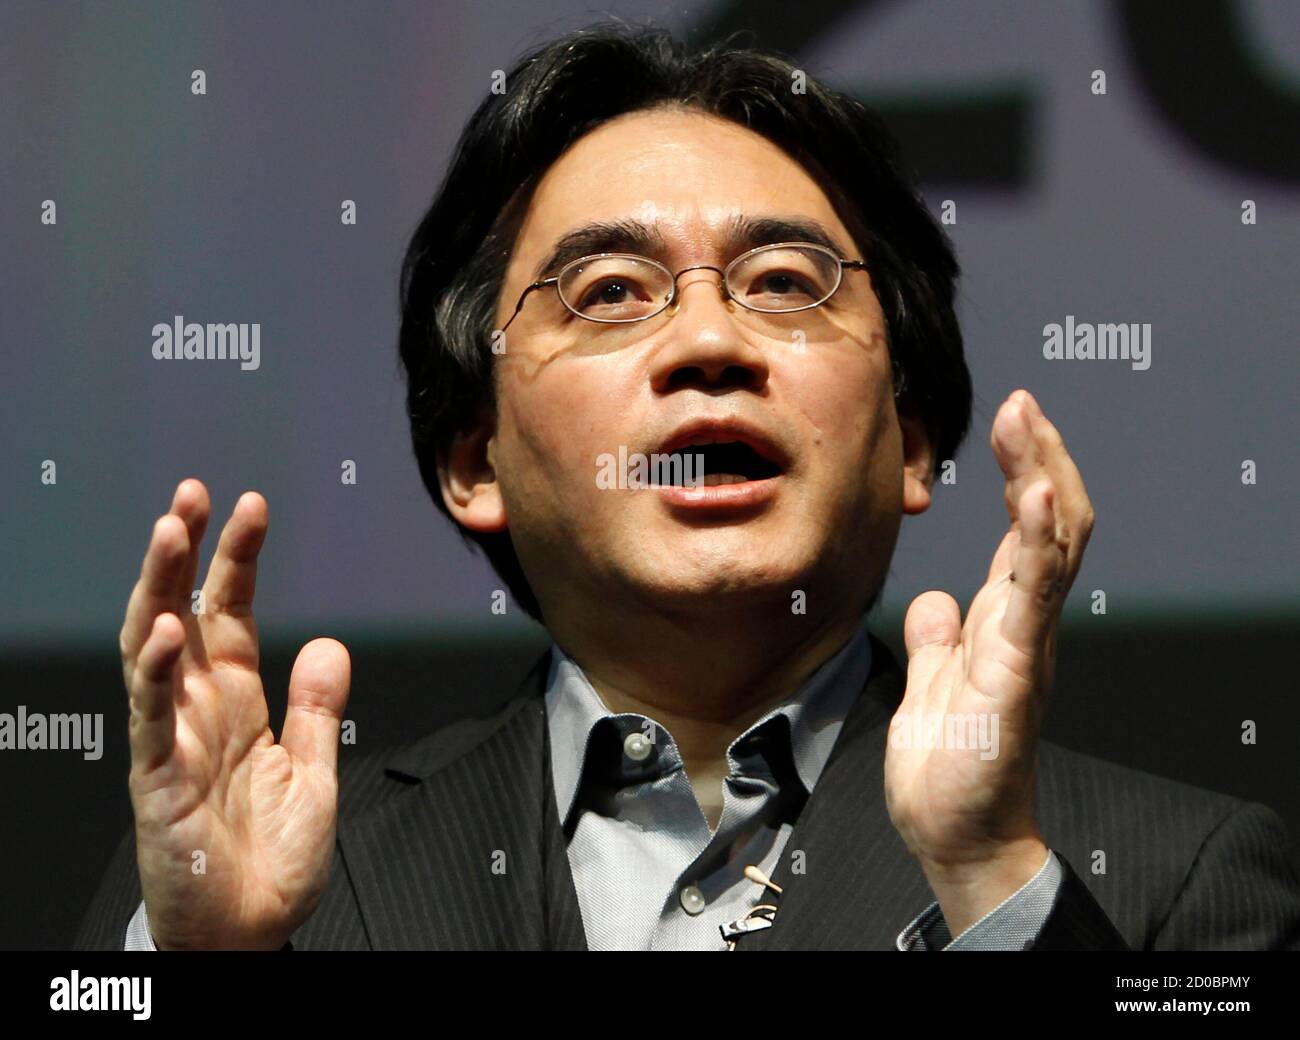 Nintendo President Satoru Iwata speaks during the Nintendo 3DS Conference  2011 in Tokyo September 13, 2011. Nintendo announced a raft of new software  in an attempt to prop up disappointing sales of